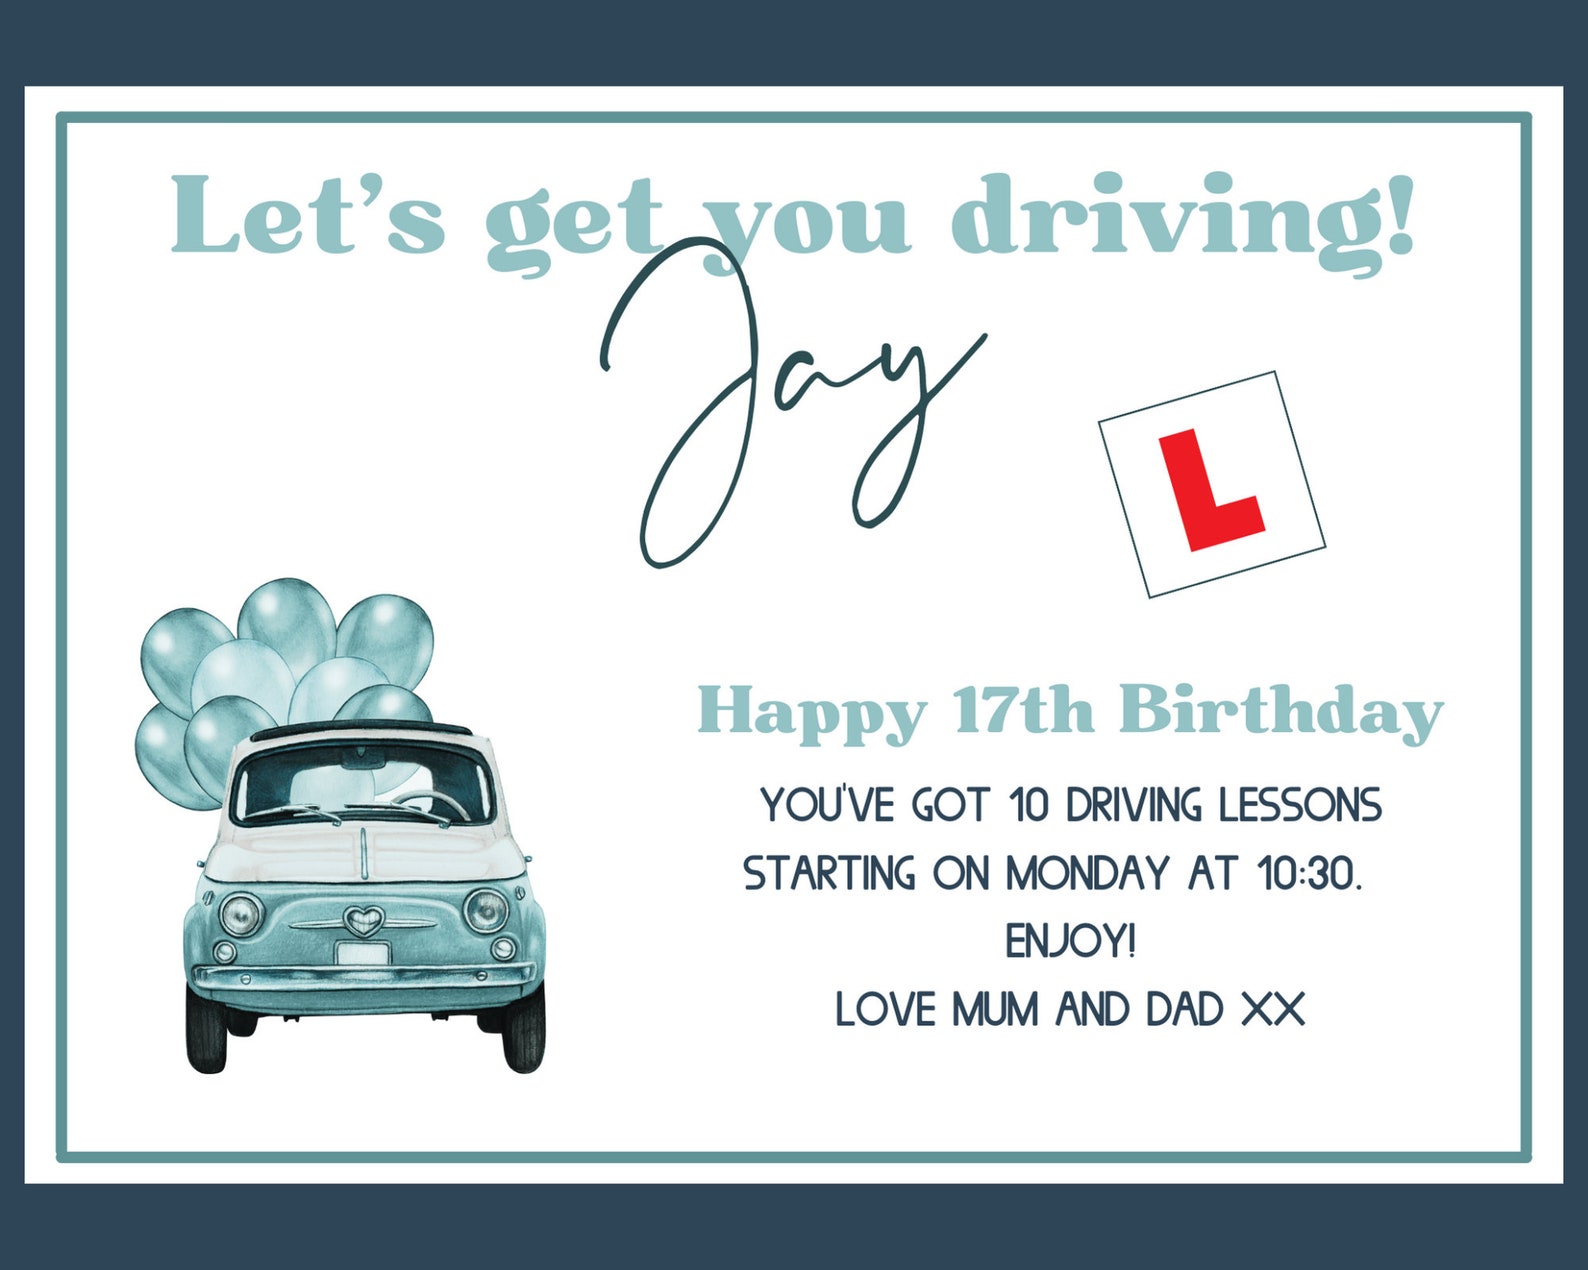 printable-driving-lesson-voucher-17th-birthday-gift-voucher-etsy-new-zealand